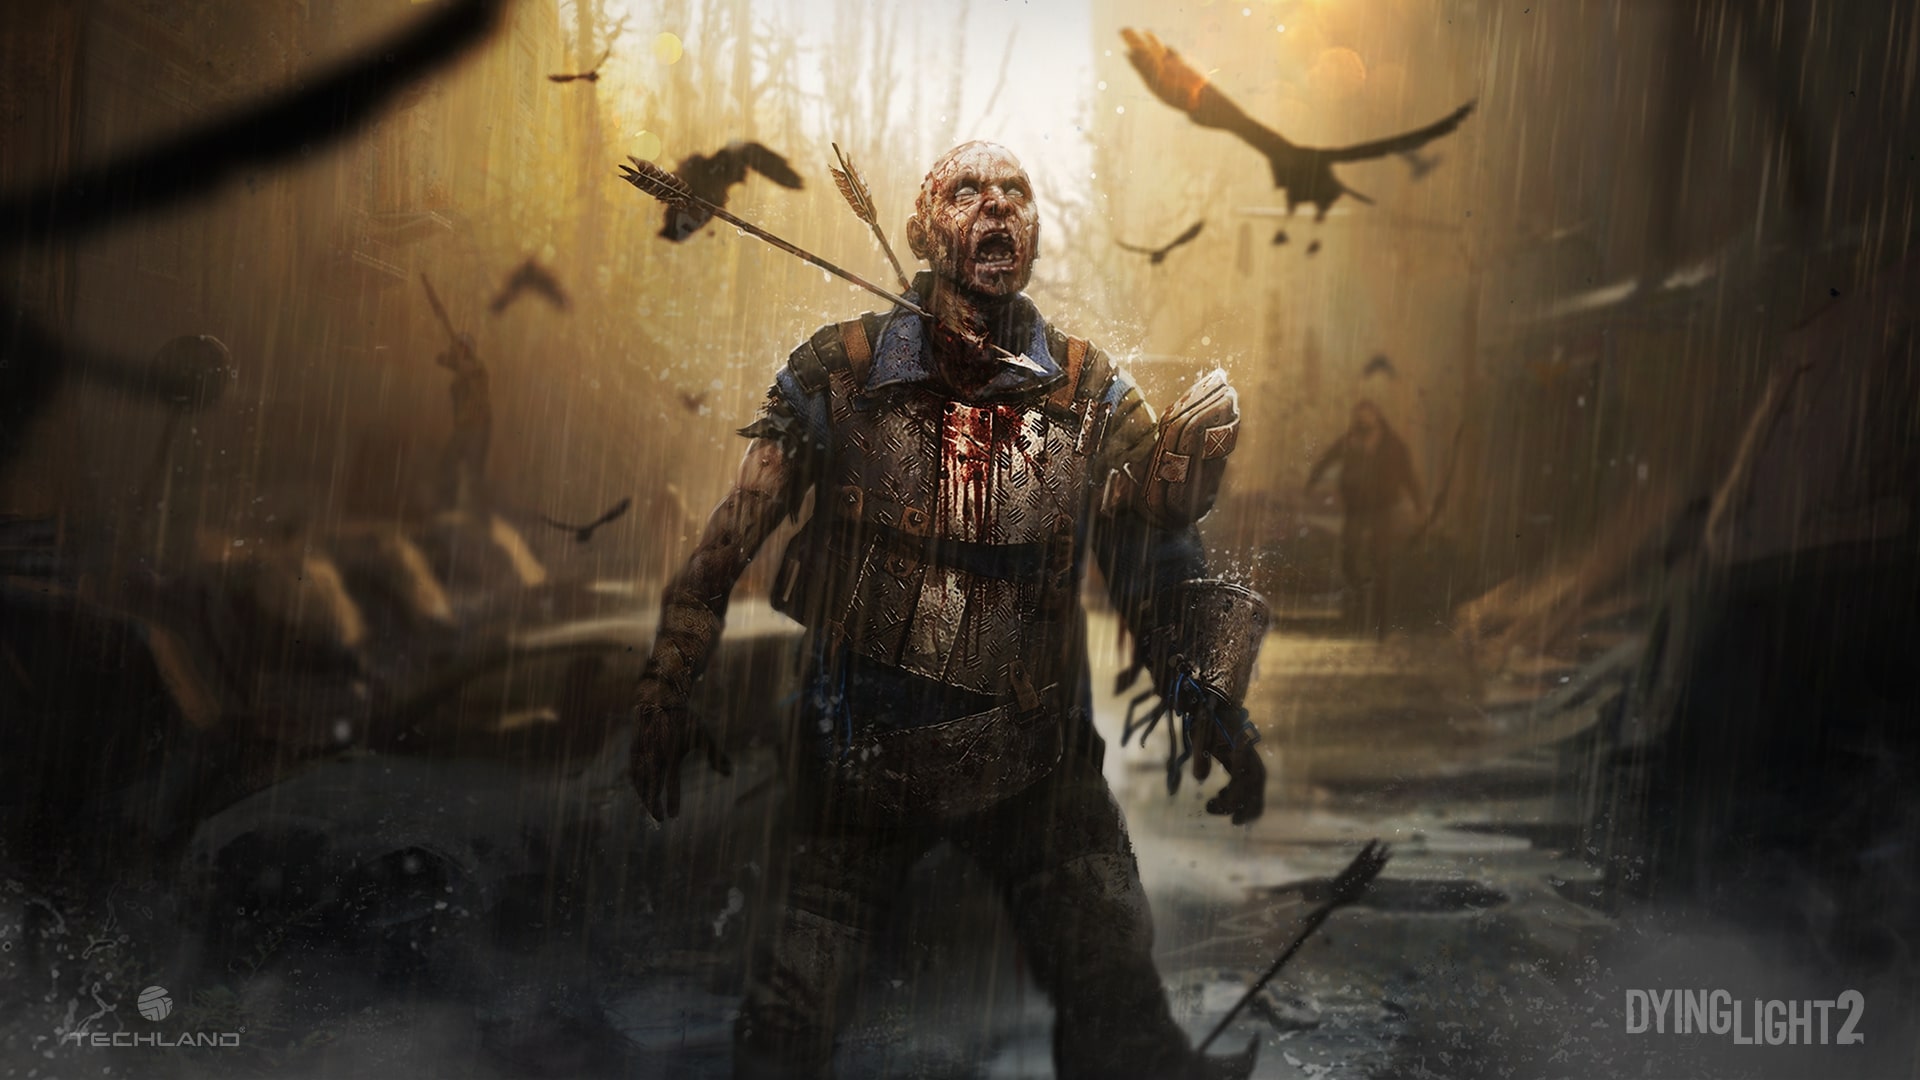 Dying Light 2/Infected | Dying Light Wiki | Fandom